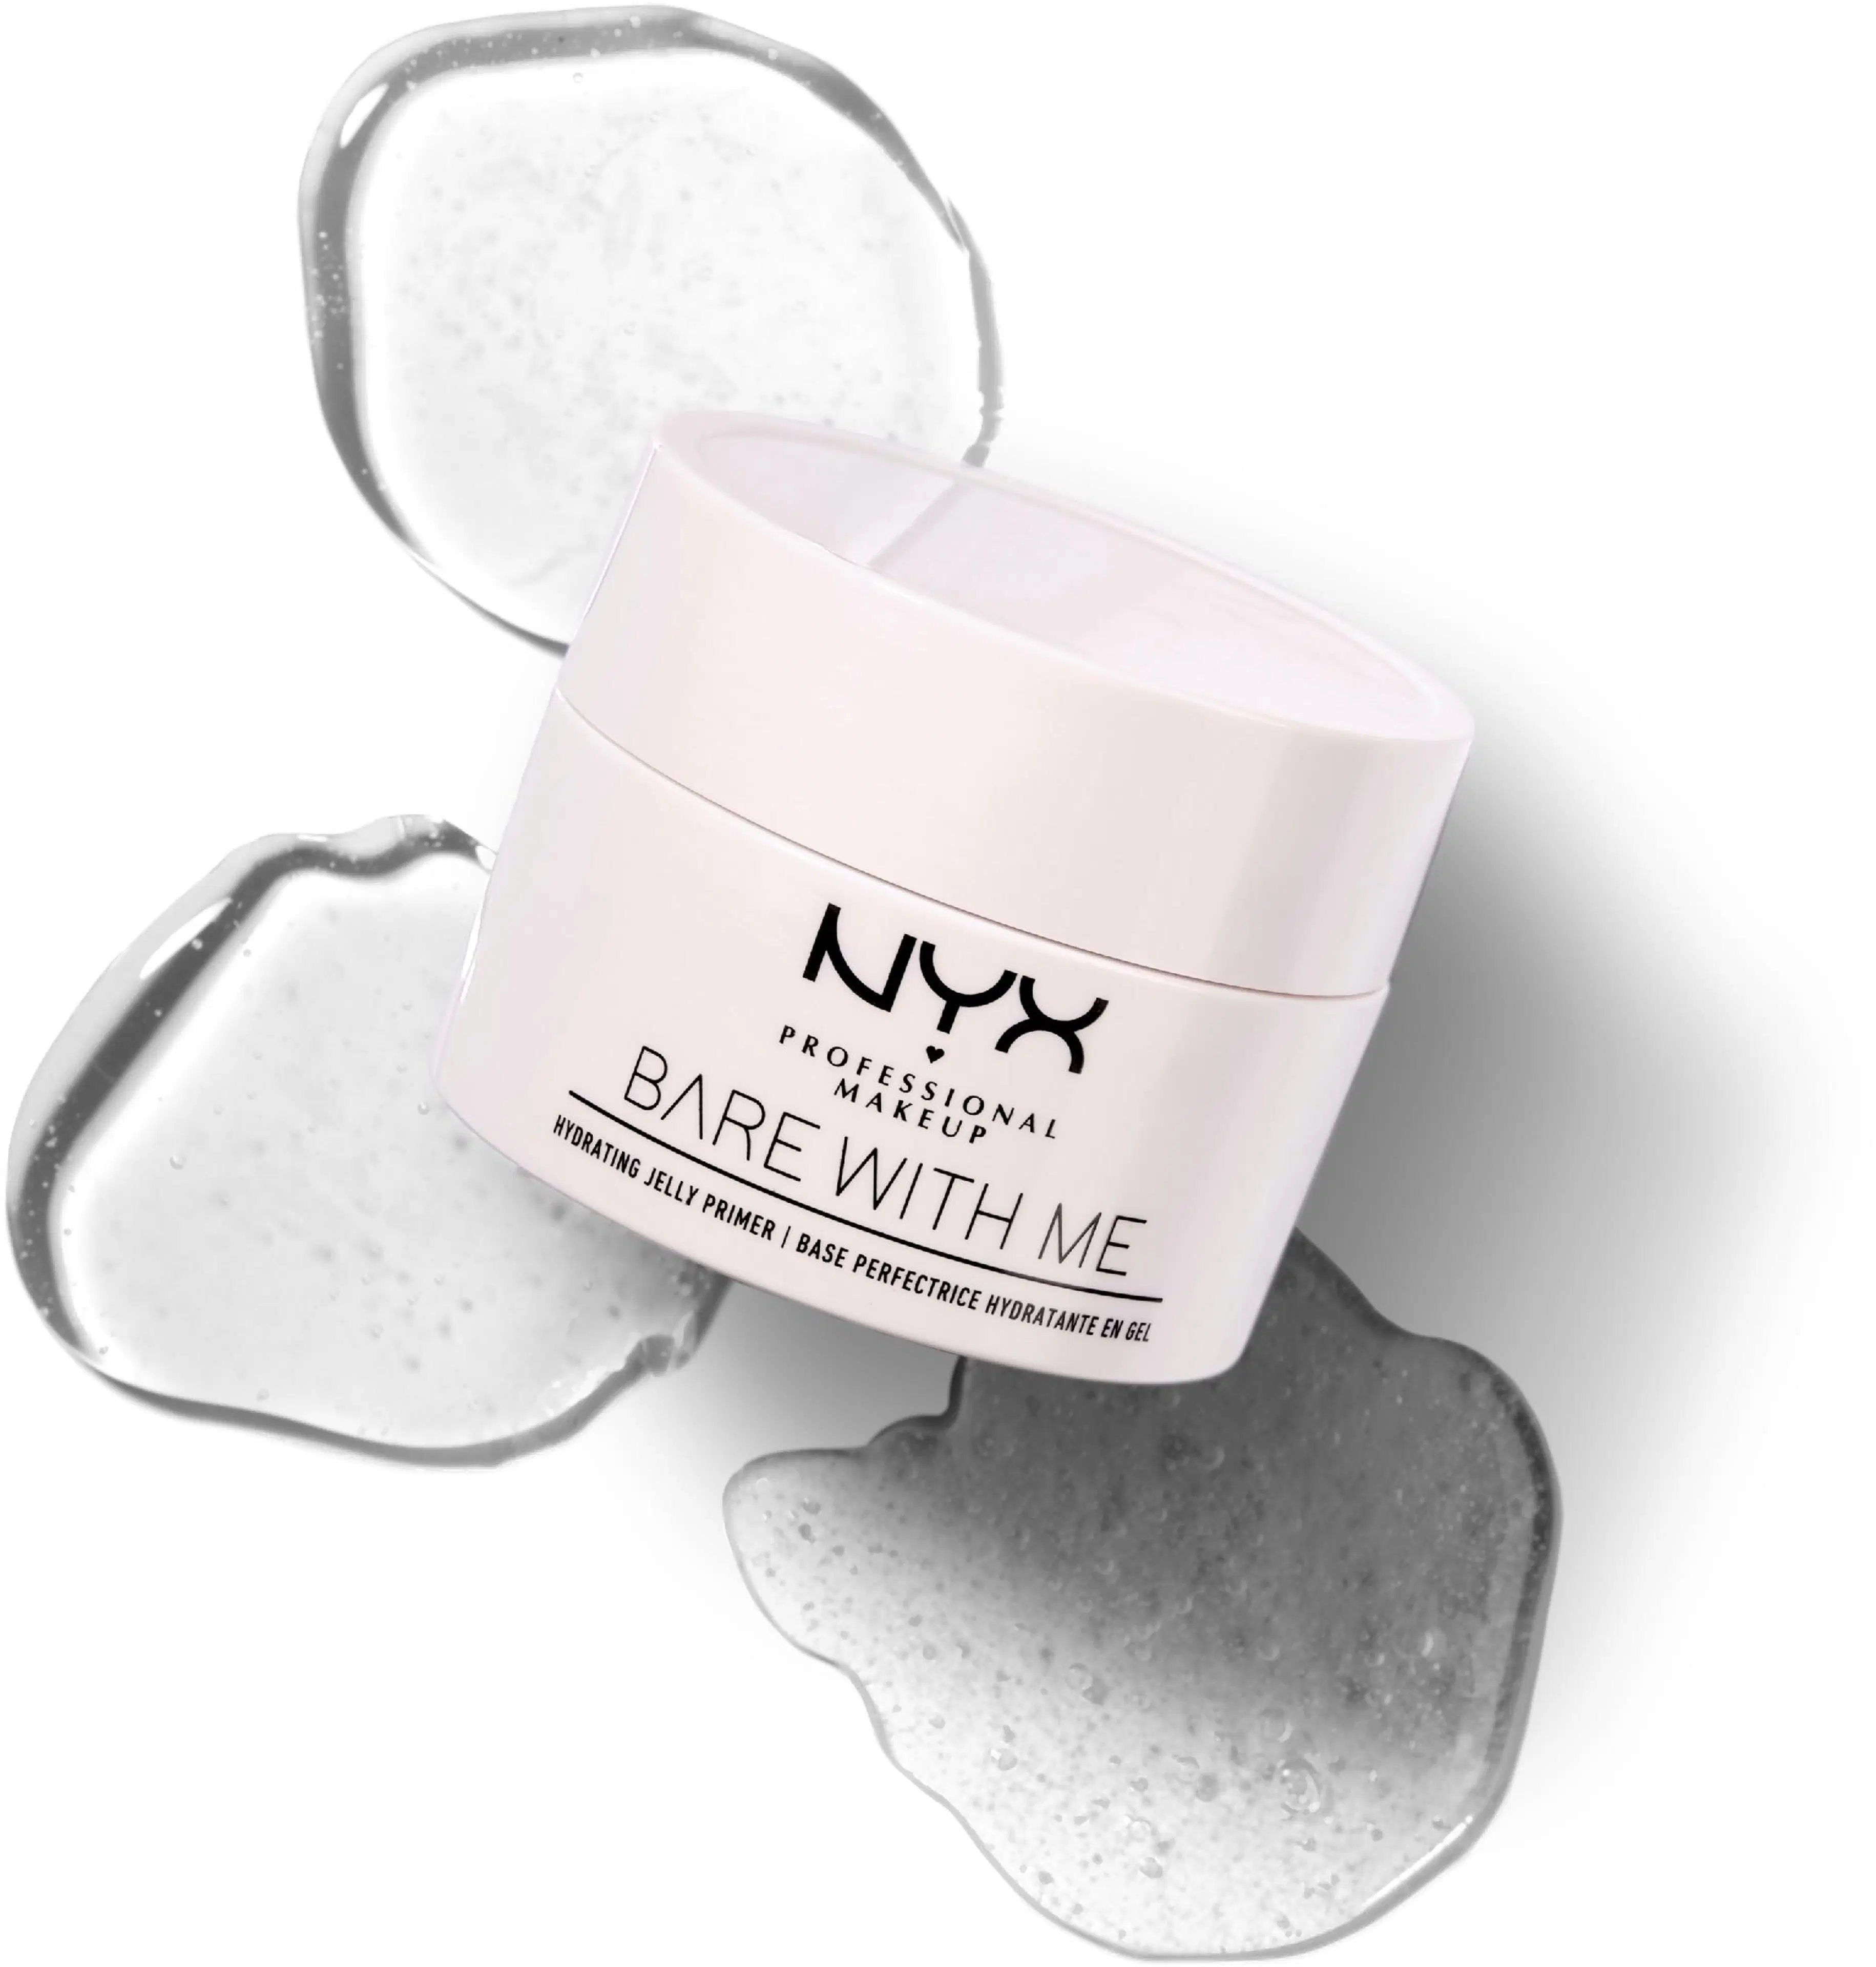 NYX Professional Makeup Bare With Me Hydrating Jelly Primer pohjustustuote 40g